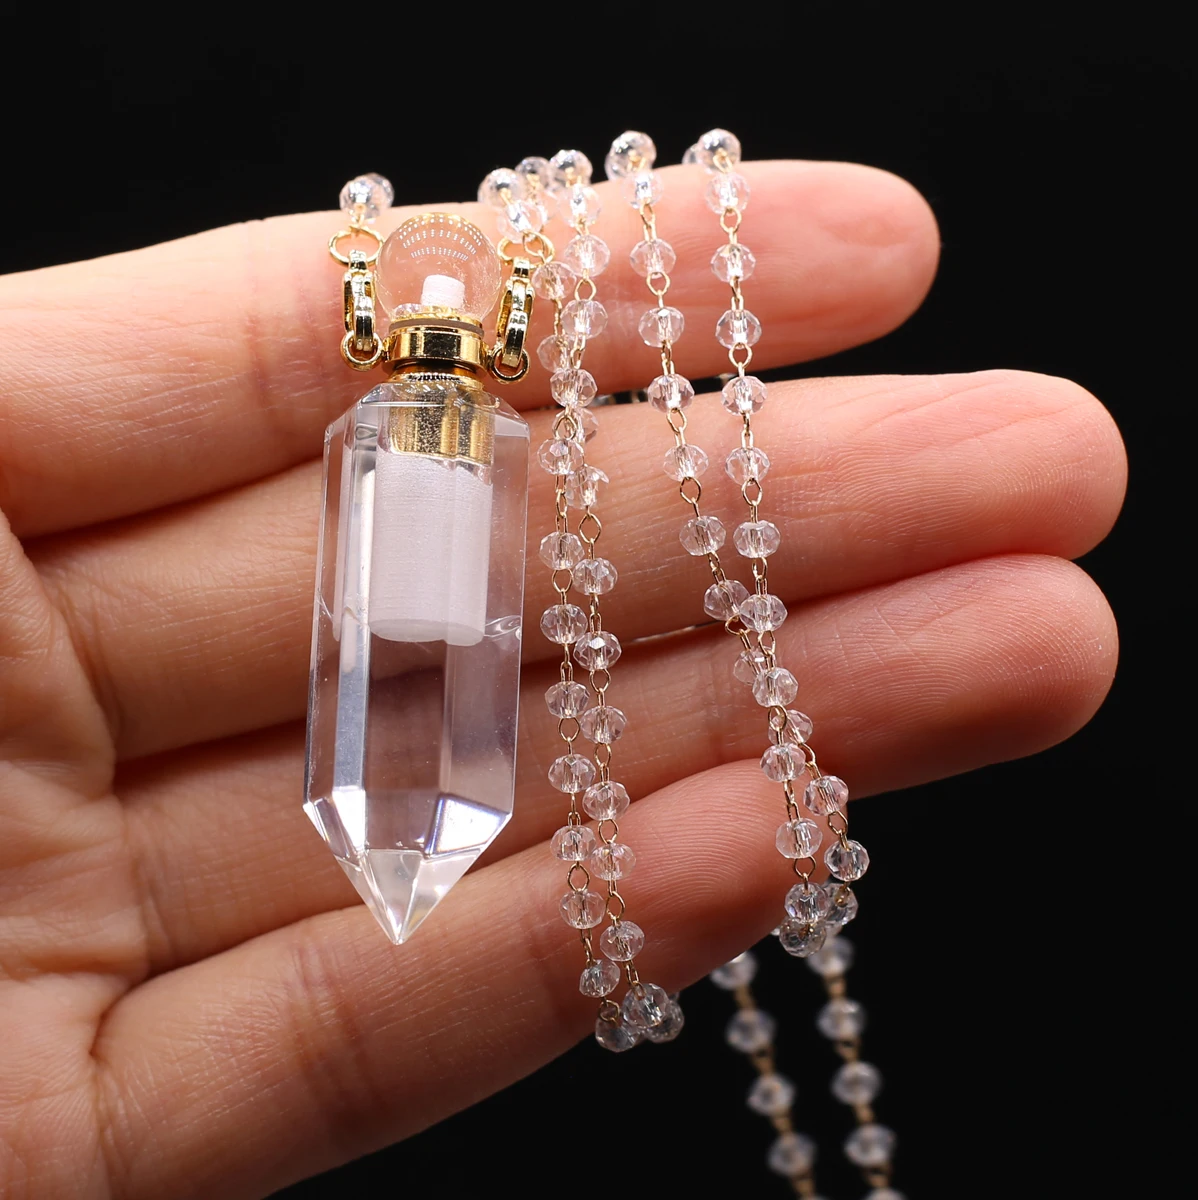 

Clear Quartz Natural Stone Gem Faceted Pyramid Perfume Bottle Diffuser Pendant Necklace MakingDIYJewelry Gift Party Decor14x48MM